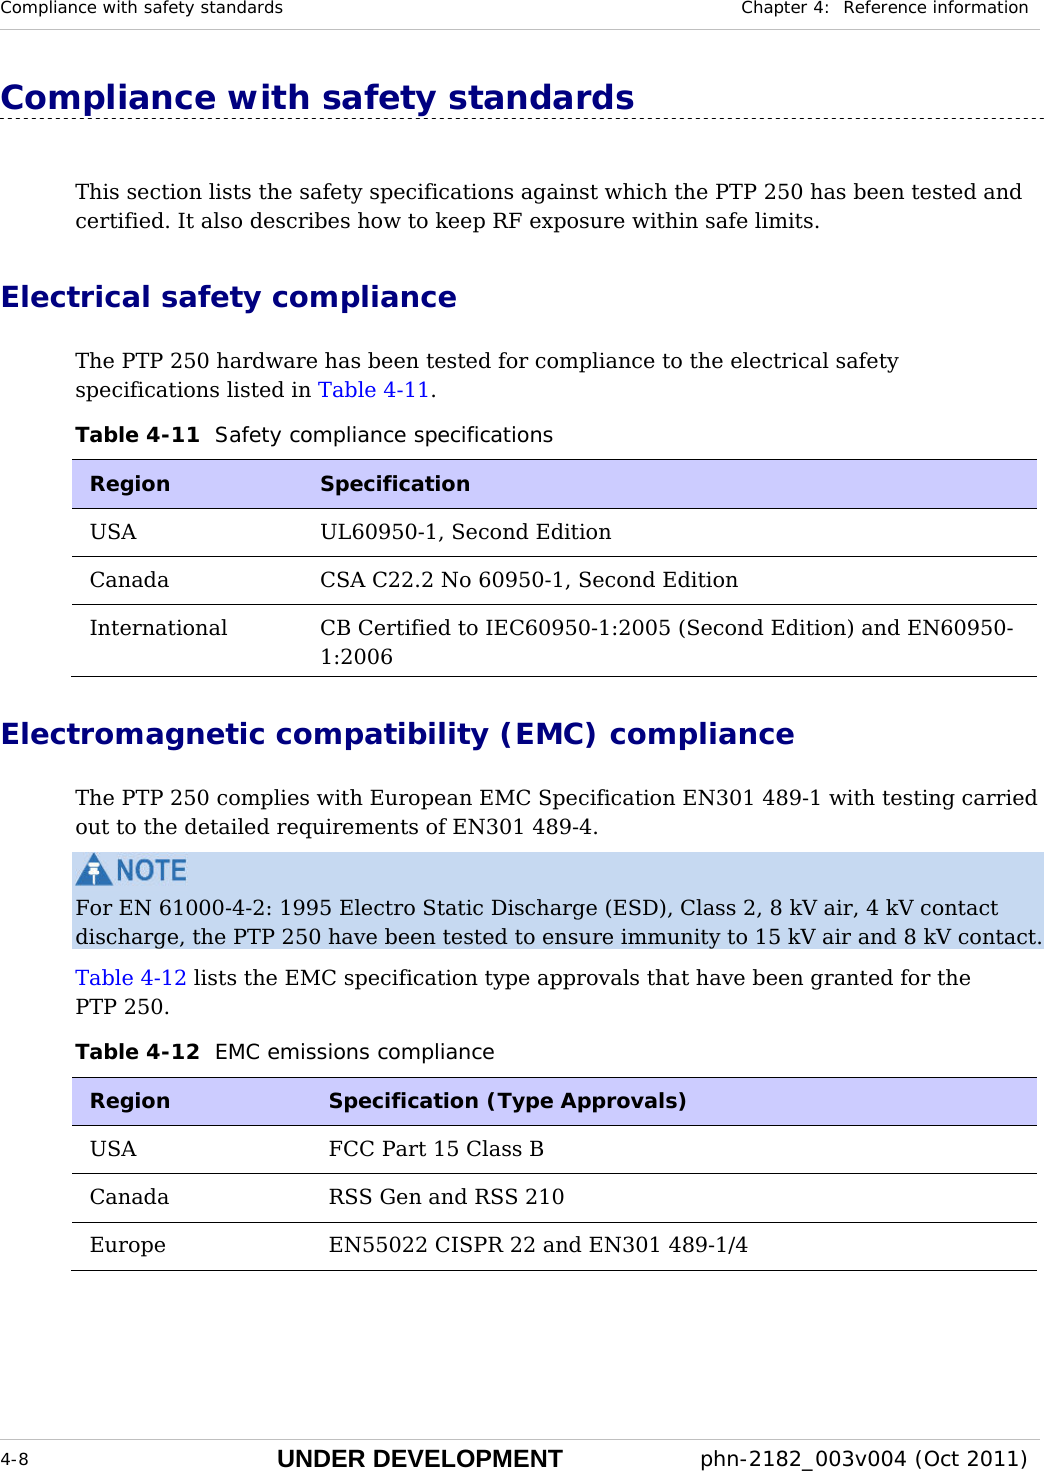 Compliance with safety standards  Chapter 4:  Reference information  4-8 UNDER DEVELOPMENT  phn-2182_003v004 (Oct 2011)  Compliance with safety standards This section lists the safety specifications against which the PTP 250 has been tested and certified. It also describes how to keep RF exposure within safe limits. Electrical safety compliance  The PTP 250 hardware has been tested for compliance to the electrical safety specifications listed in Table 4-11. Table 4-11  Safety compliance specifications Region  Specification USA  UL60950-1, Second Edition Canada  CSA C22.2 No 60950-1, Second Edition International  CB Certified to IEC60950-1:2005 (Second Edition) and EN60950-1:2006 Electromagnetic compatibility (EMC) compliance  The PTP 250 complies with European EMC Specification EN301 489-1 with testing carried out to the detailed requirements of EN301 489-4.  For EN 61000-4-2: 1995 Electro Static Discharge (ESD), Class 2, 8 kV air, 4 kV contact discharge, the PTP 250 have been tested to ensure immunity to 15 kV air and 8 kV contact. Table 4-12 lists the EMC specification type approvals that have been granted for the PTP 250. Table 4-12  EMC emissions compliance Region  Specification (Type Approvals) USA  FCC Part 15 Class B Canada  RSS Gen and RSS 210 Europe  EN55022 CISPR 22 and EN301 489-1/4  